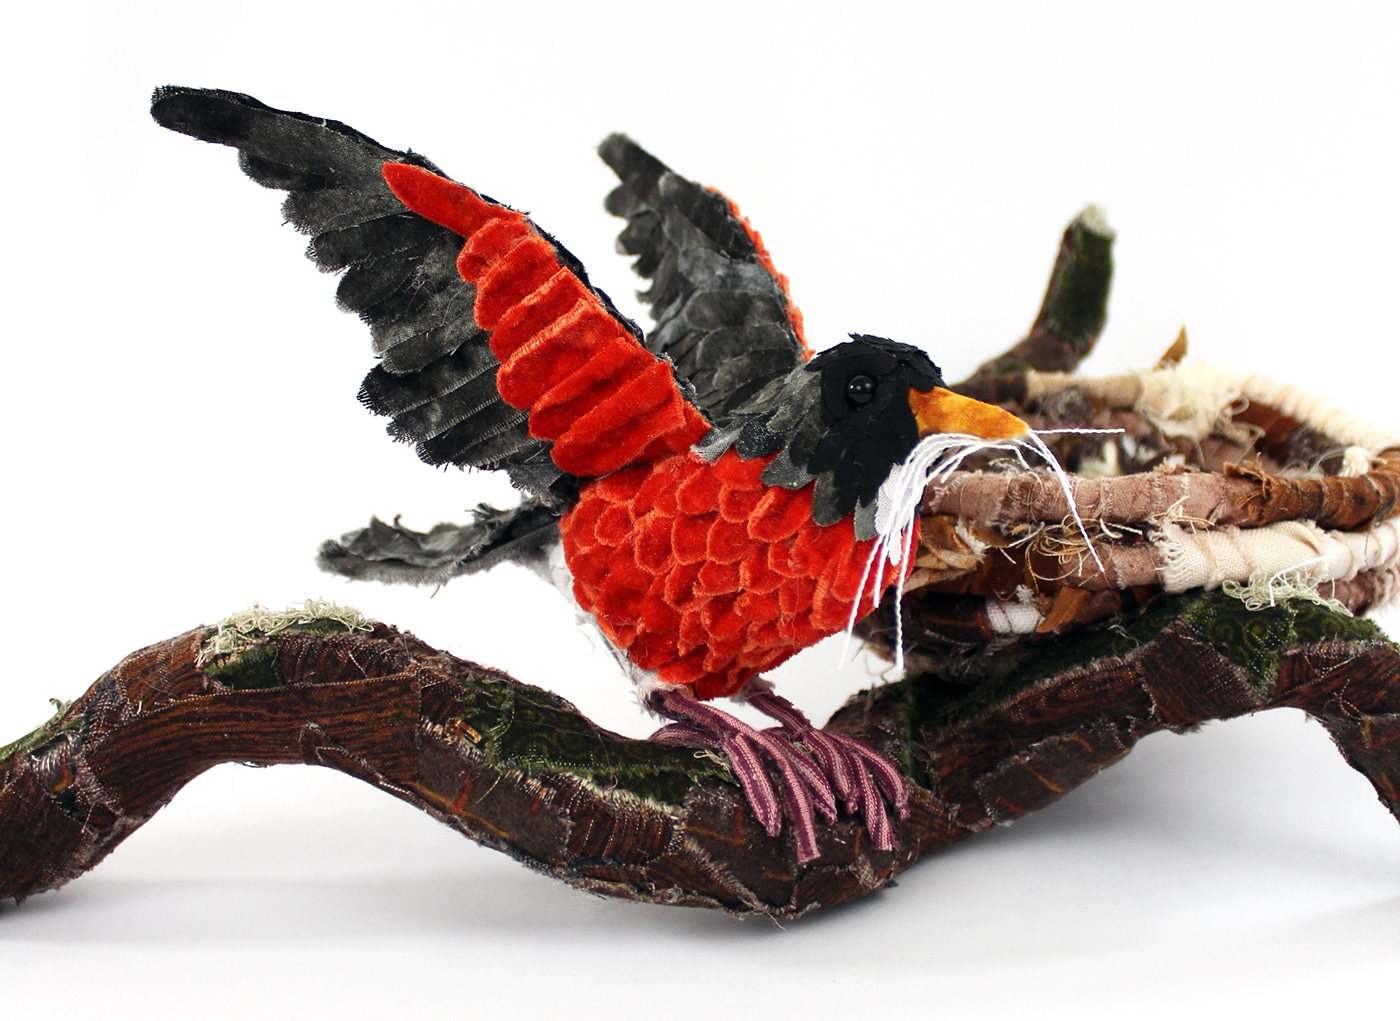 bird Nature sculpture handmade Found objects recycled materials design 3d design patchwork College Project